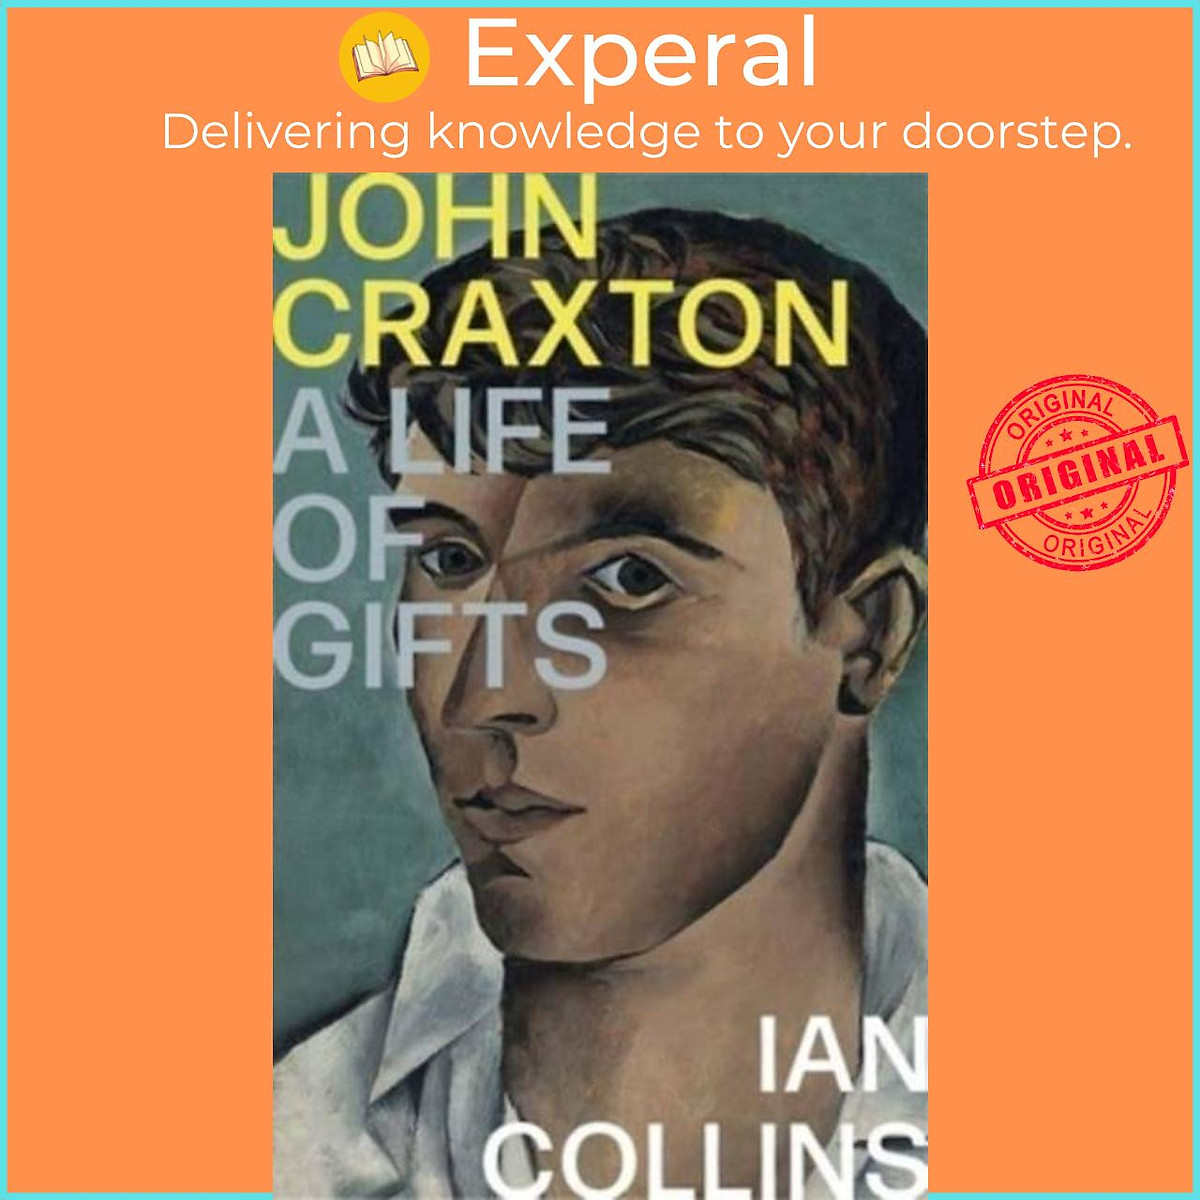 Sách - John Craxton - A Life of Gifts by Ian Collins (UK edition, paperback)